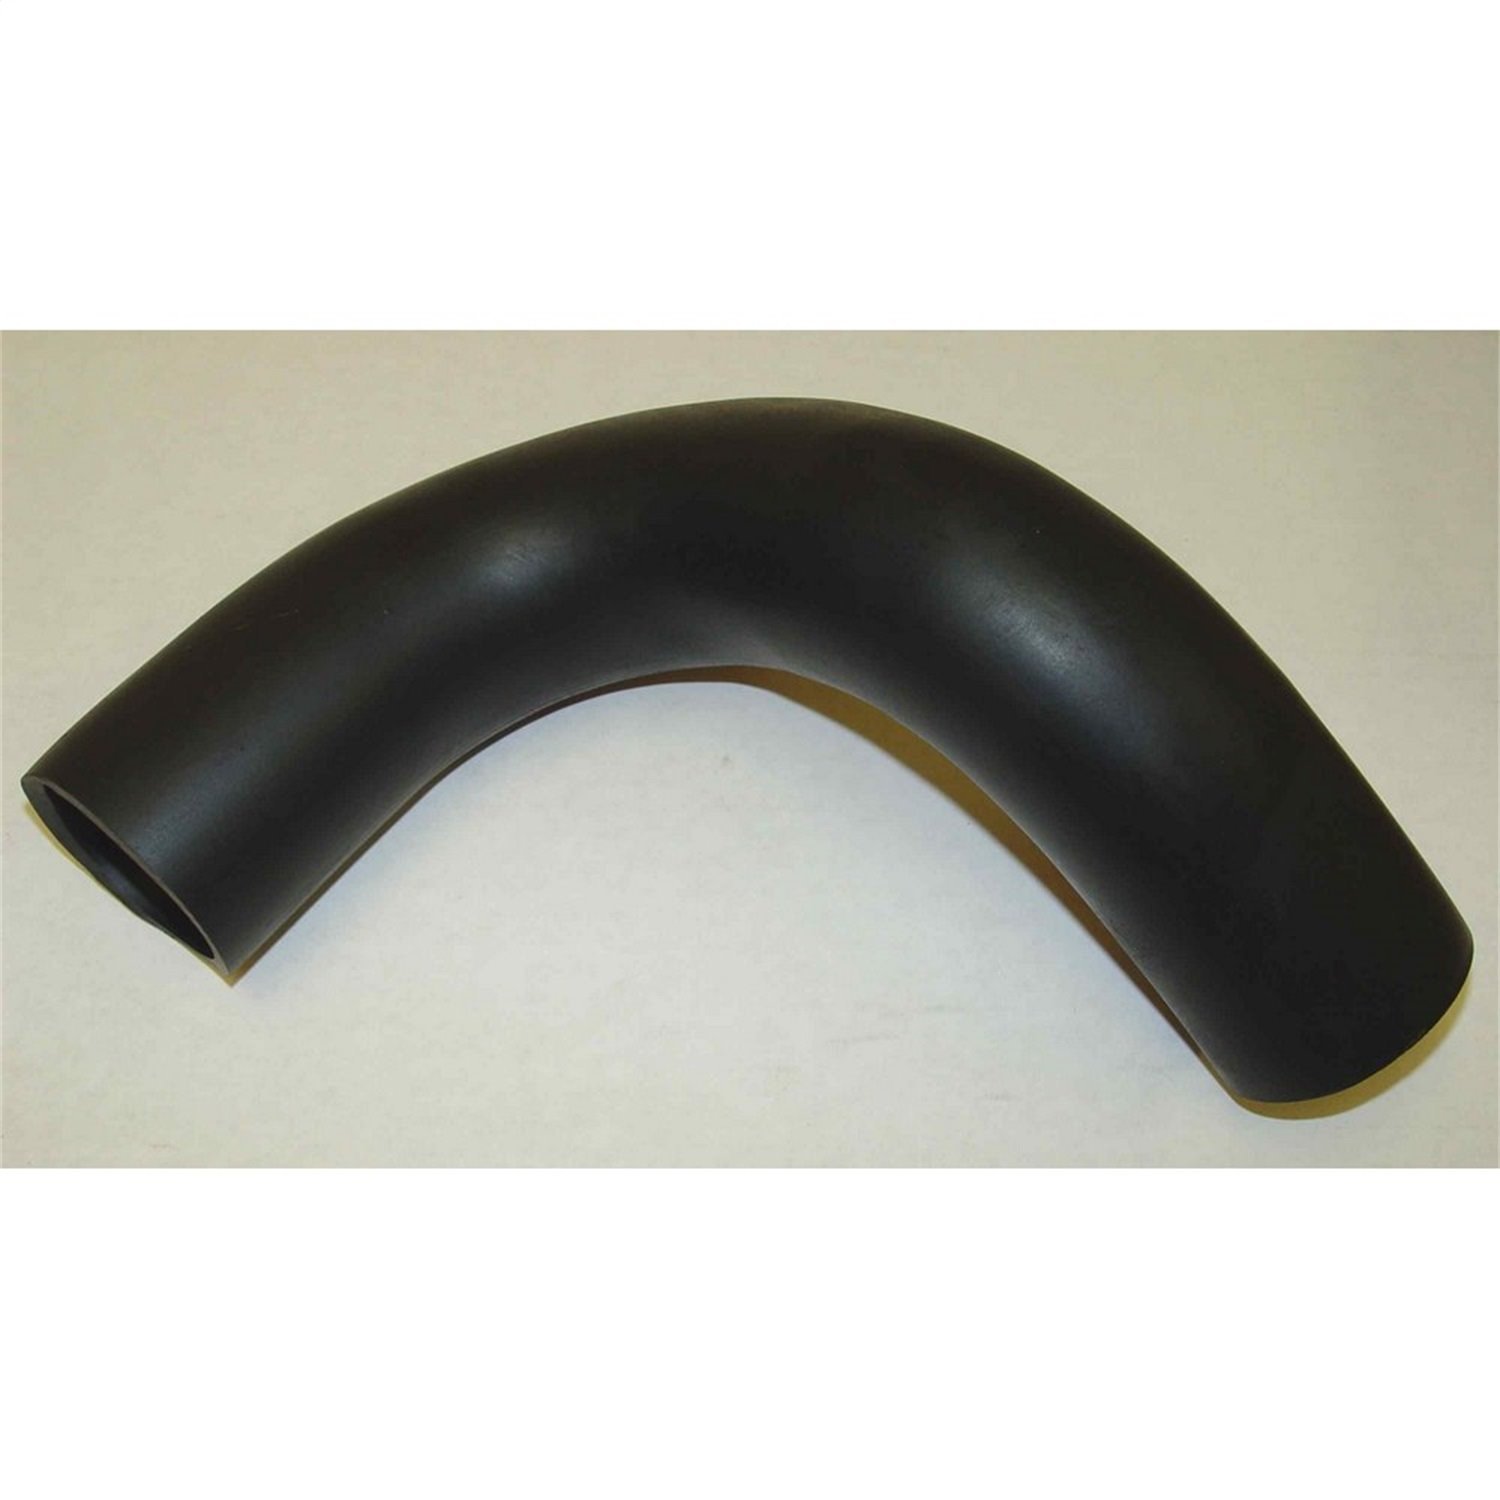 Replacement fuel filler hose from Omix-ADA has a